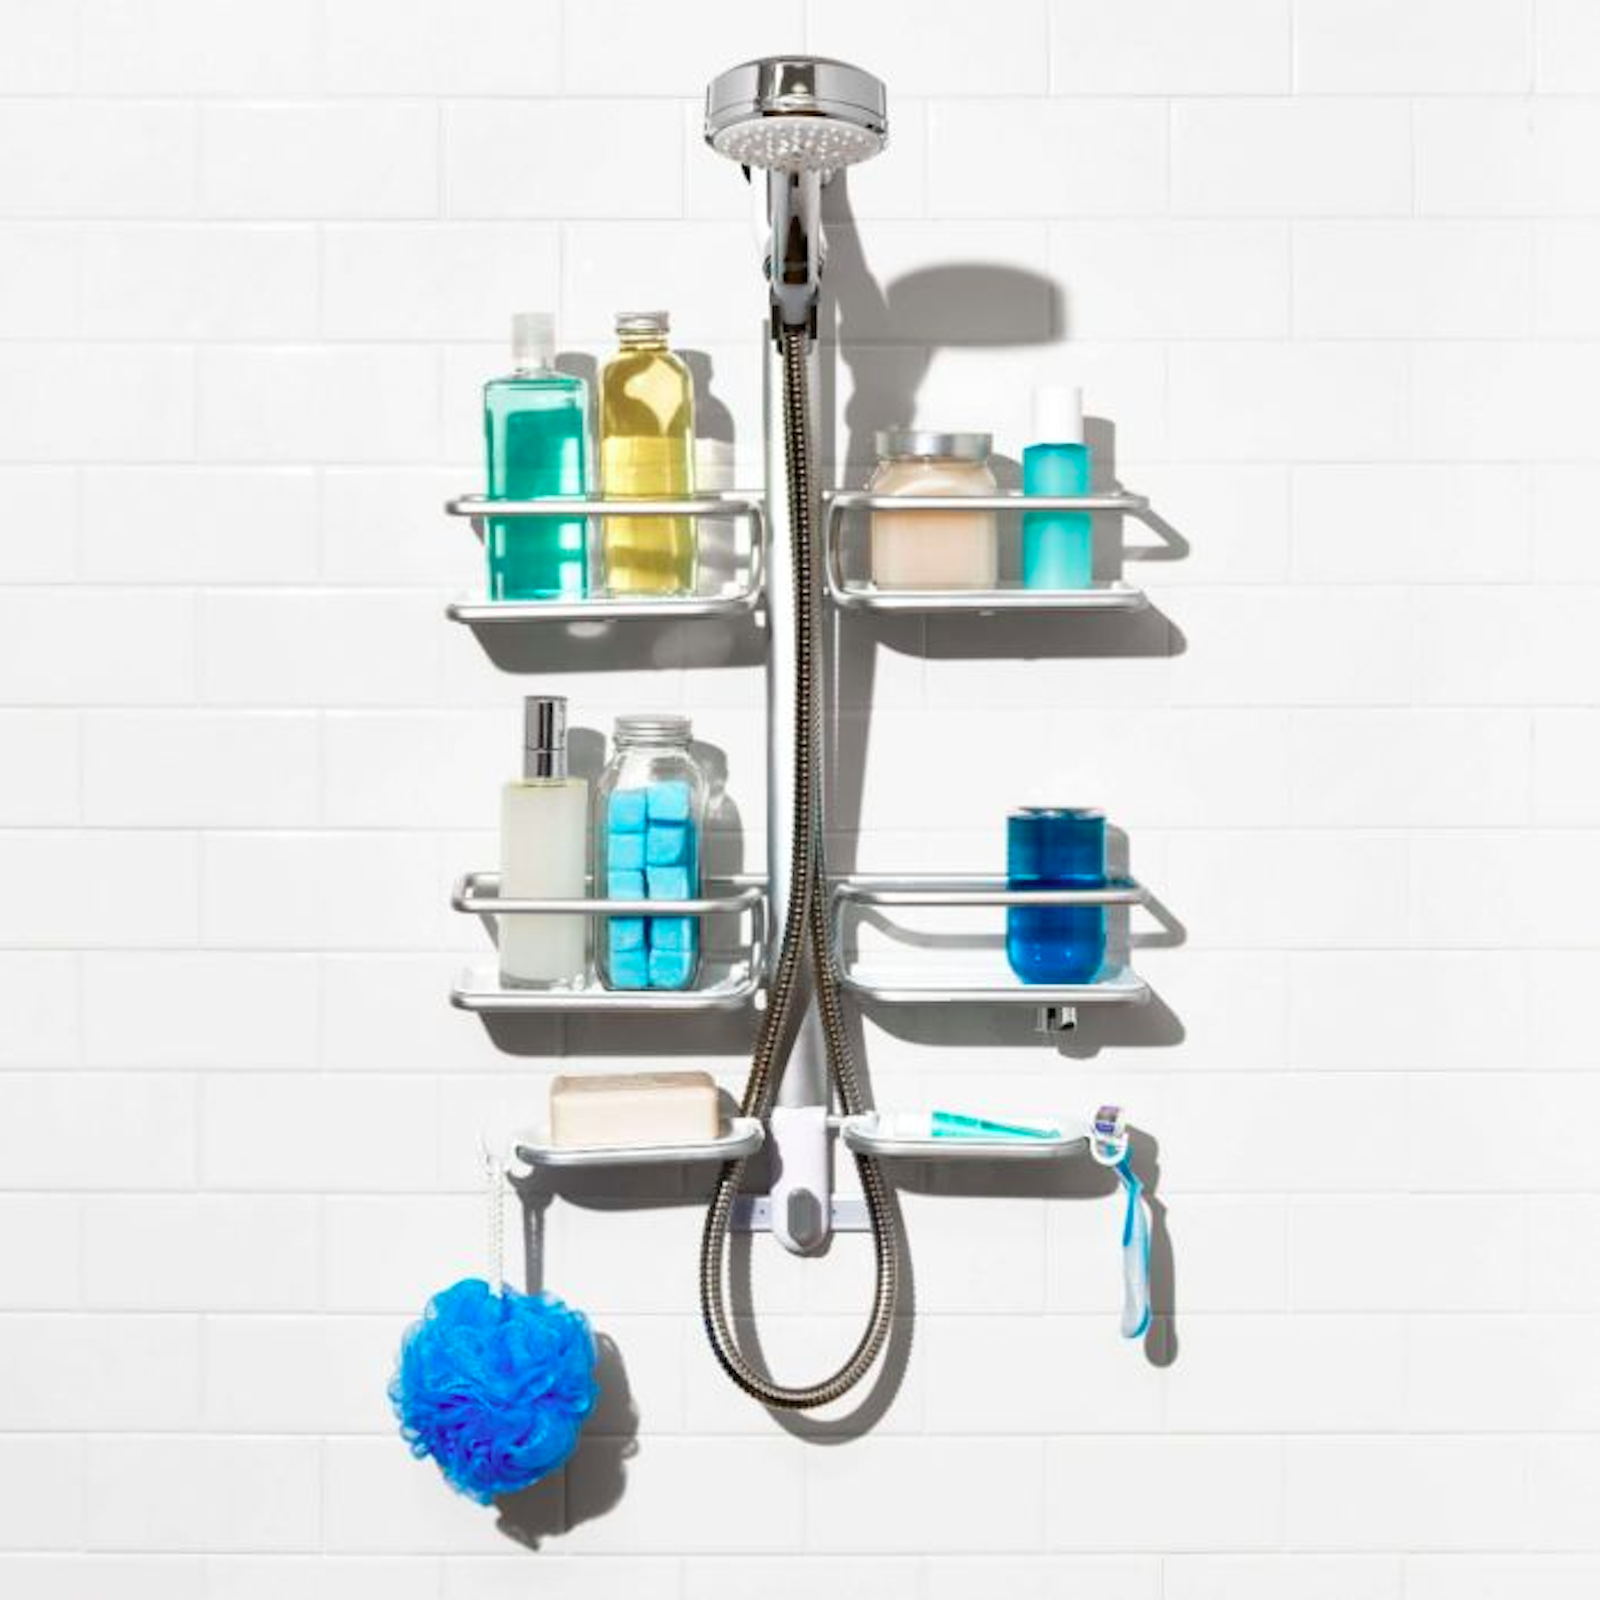 Shower Caddy Hanging over Shower Head Small Rust Roof Shower